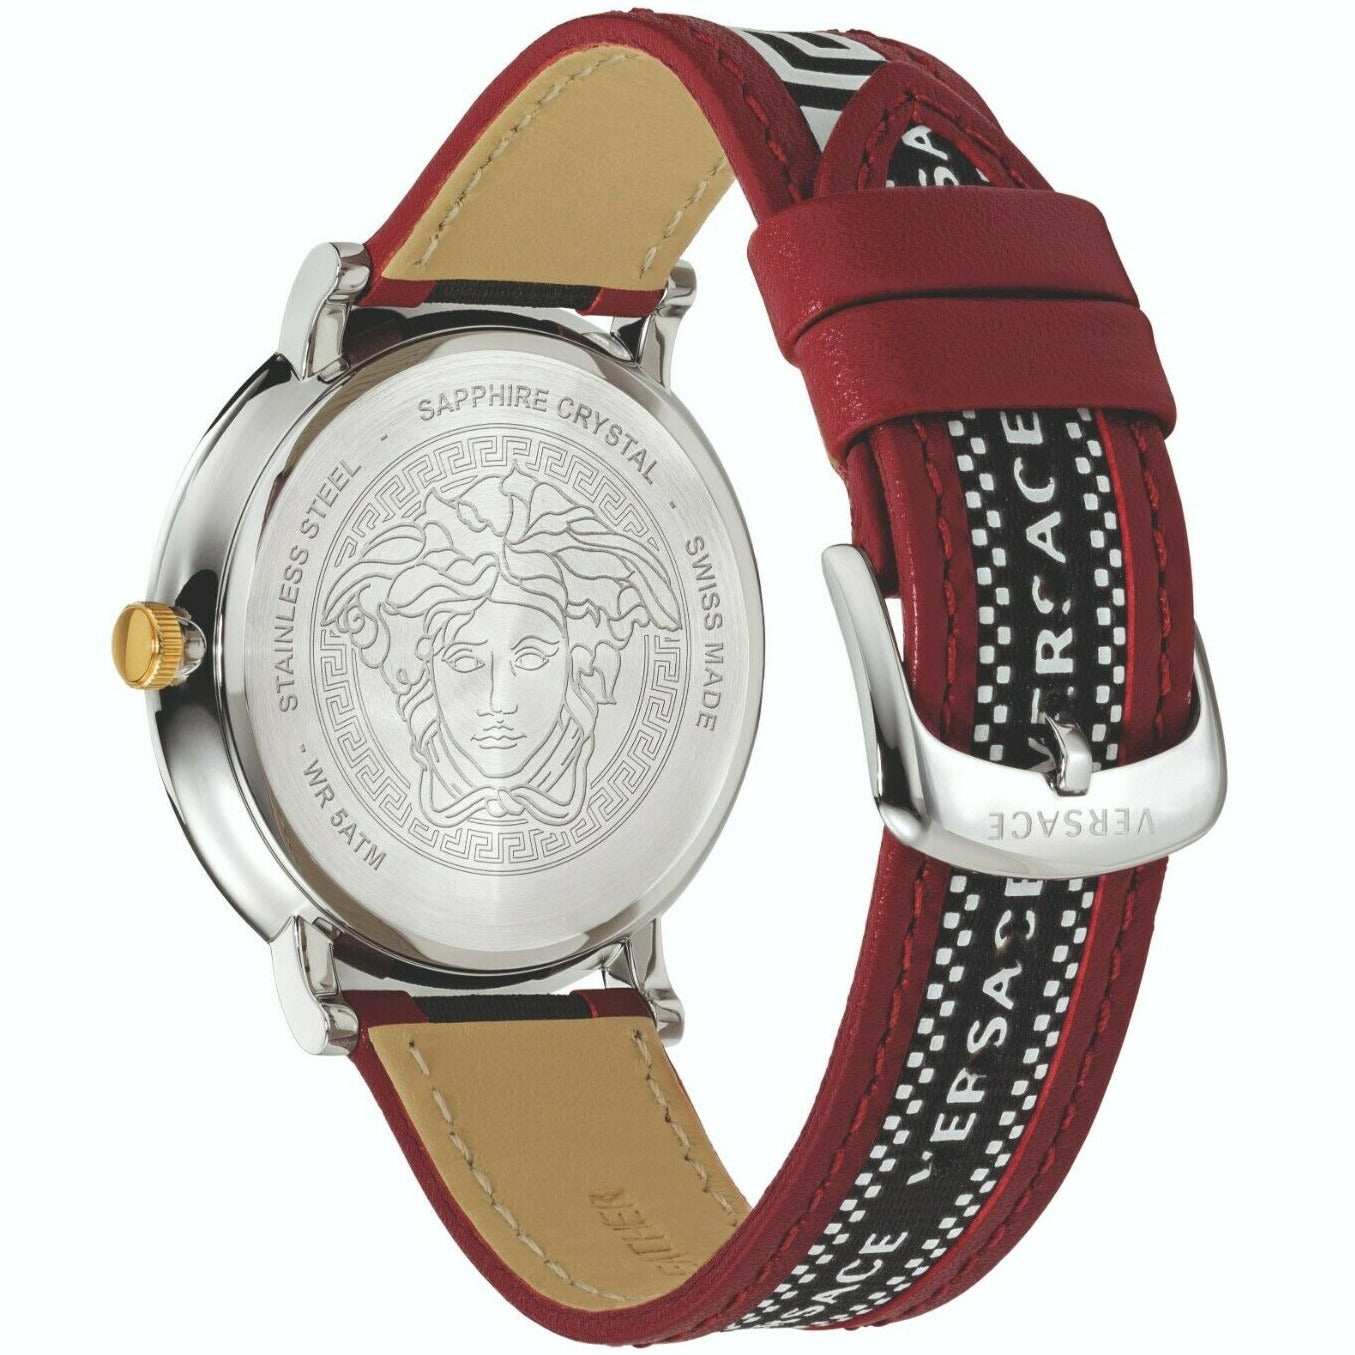 Versace V Circle Silver Dial Two Tone Leather Strap Watch for Men - VEBQ01319